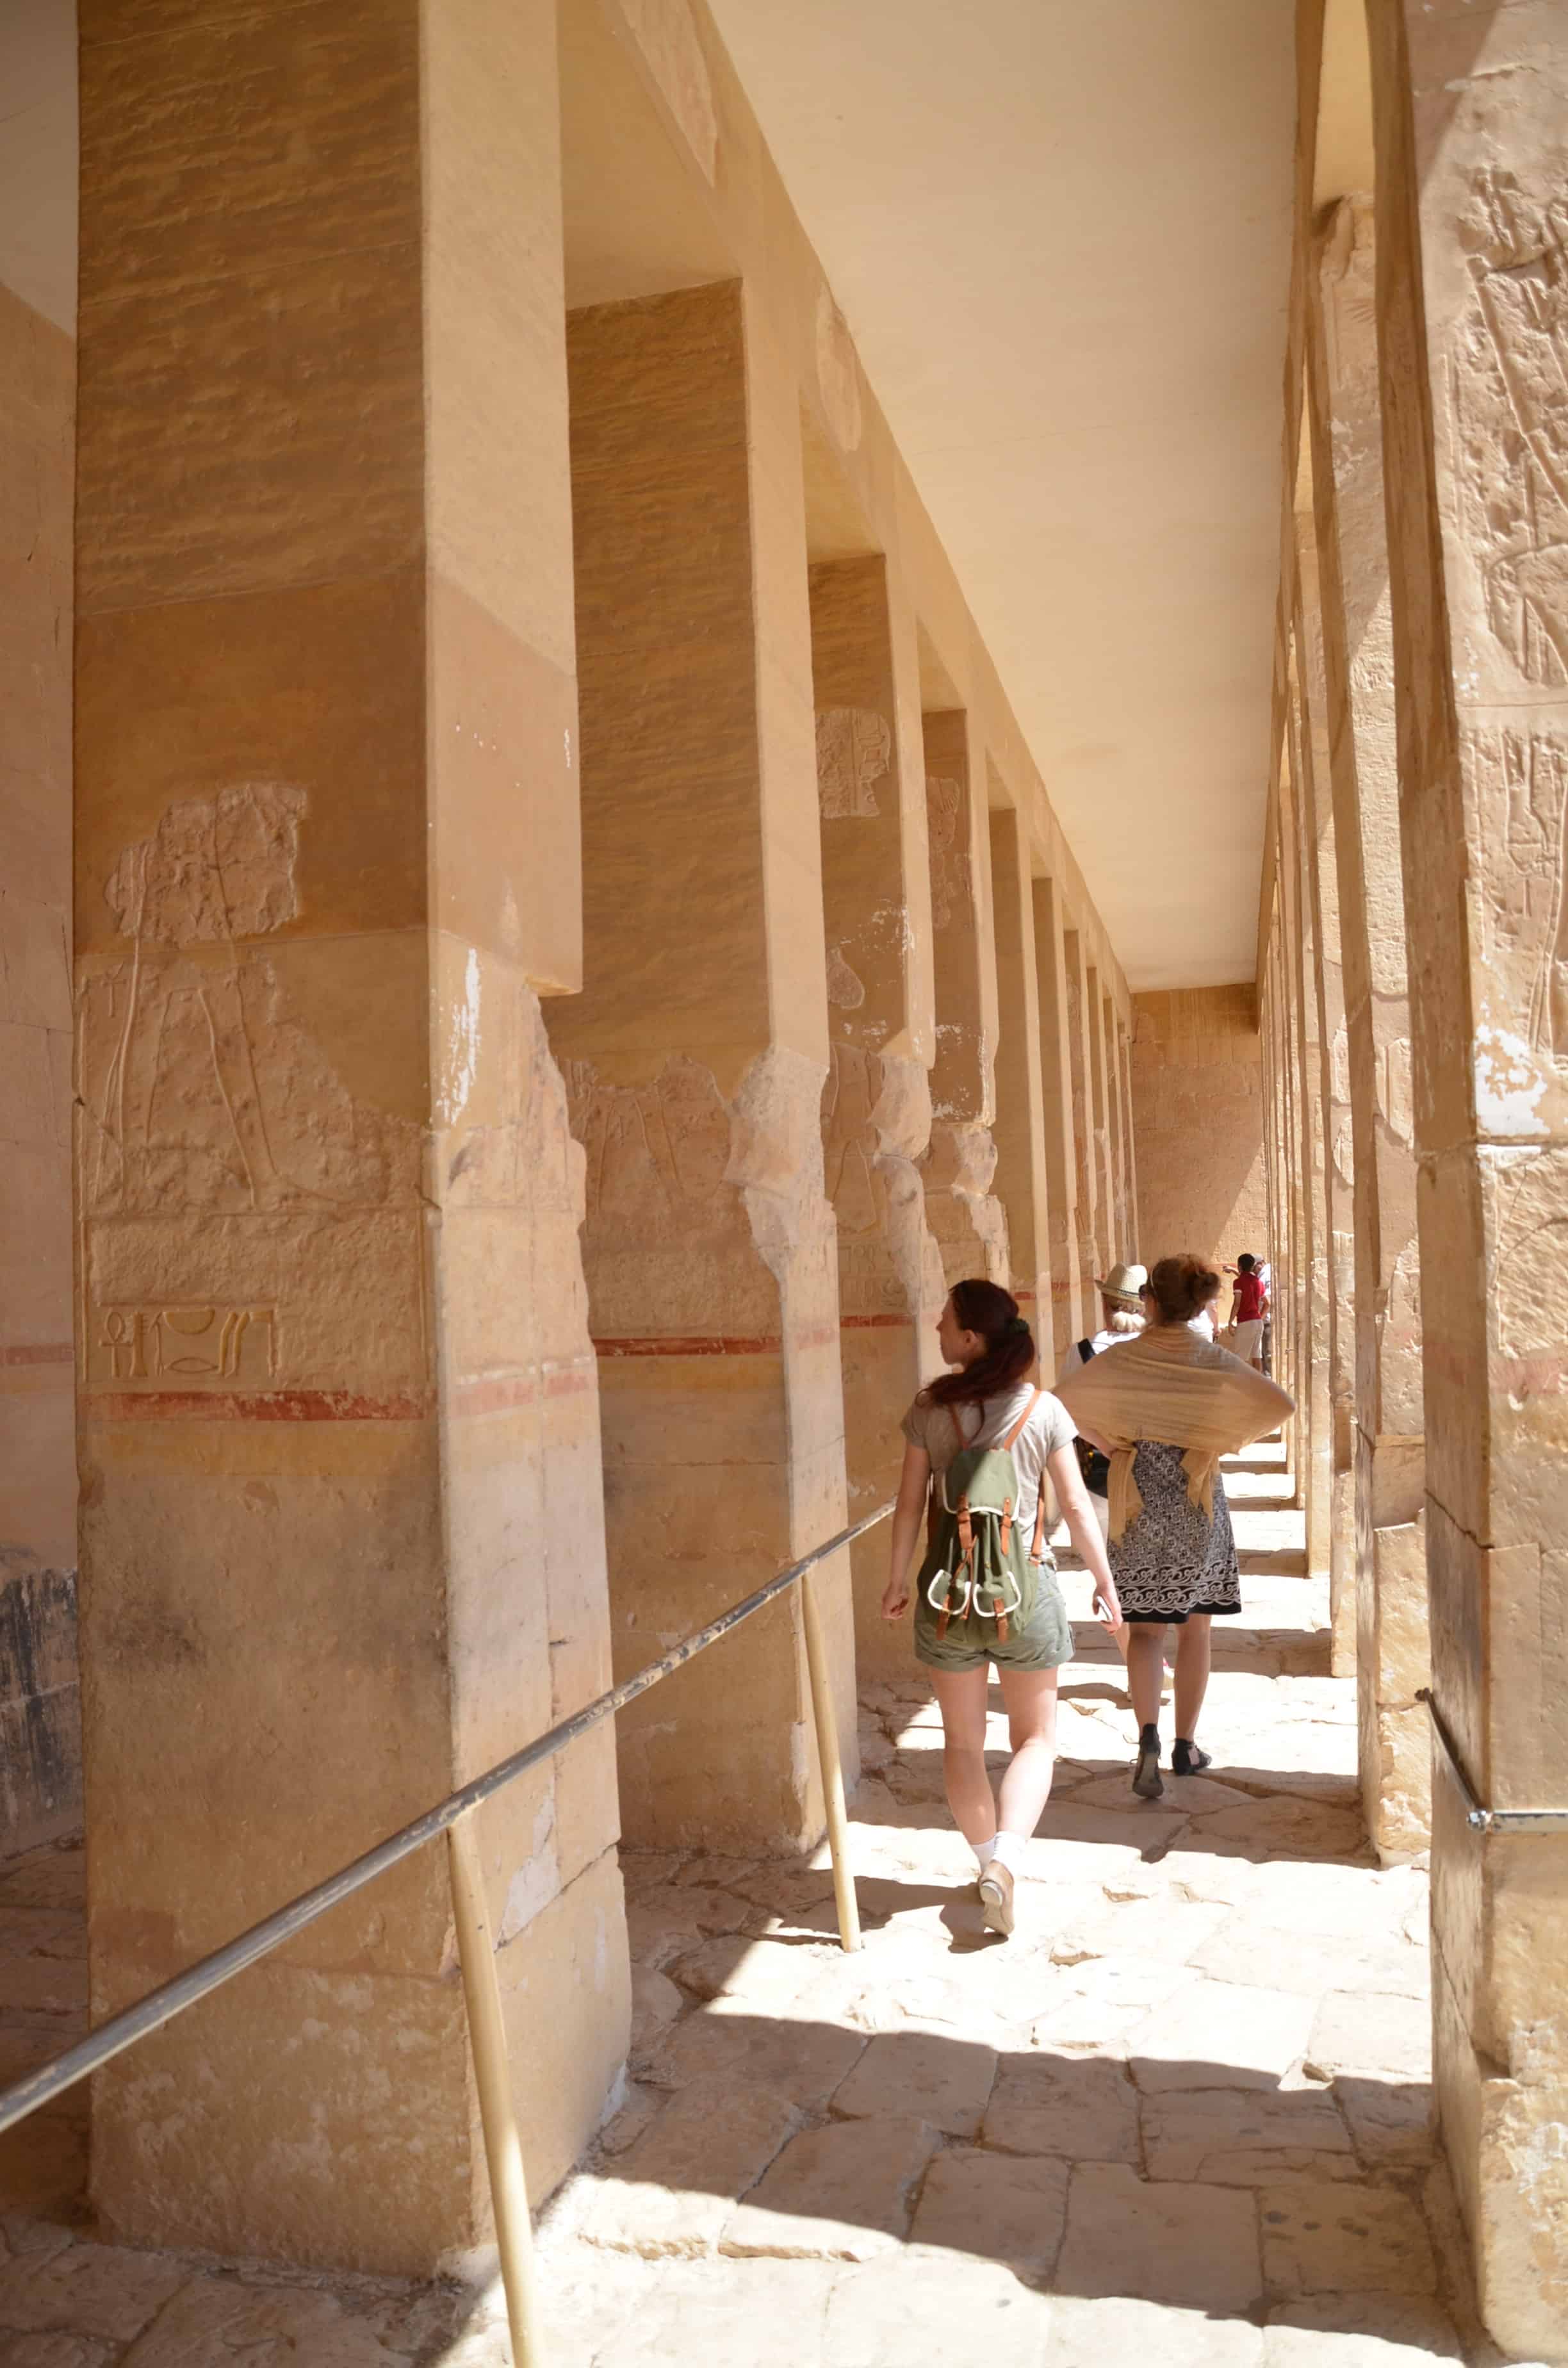 Punt Expedition Colonnade at the Temple of Hatshepsut in Luxor, Egypt